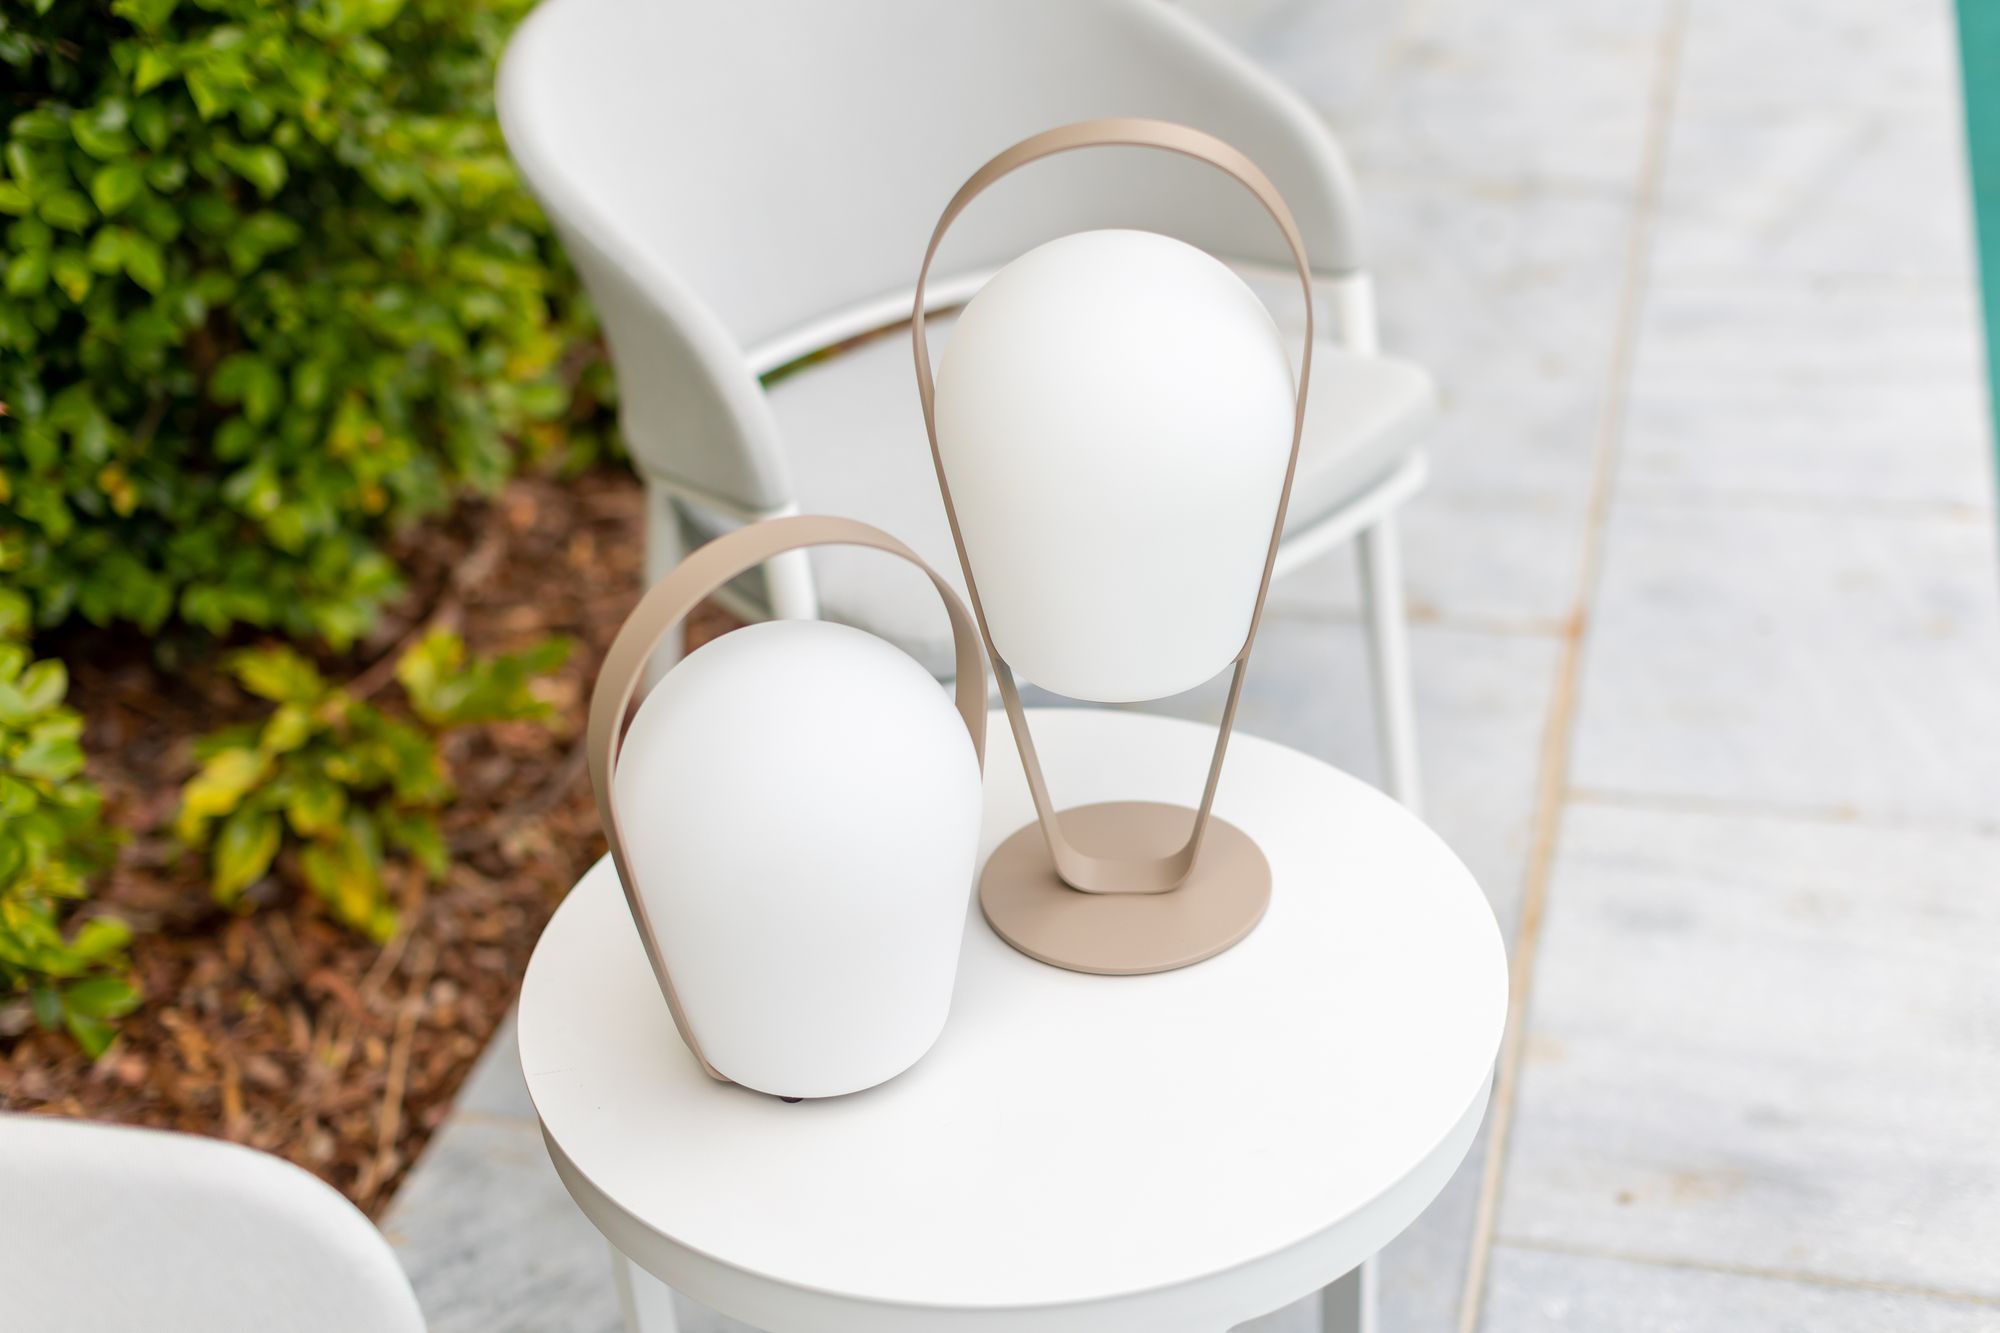 Remarkable Outdoor Living: Bobby Outdoor Aluminum Lamp Low.This image features two modern portable LED lamps placed on a round white table. The lamps have a minimalist design, with matte white diffusers and a sleek bronze-colored handle that curves around the diffuser. The handle serves both as a design element and a functional part, making it easy to carry the lamps. The white and bronze colors suggest a contemporary and elegant aesthetic, fitting well for modern outdoor or indoor living spaces. The greenery in the background provides a nice contrast and indicates that this setting is outdoors, perhaps on a patio or deck.